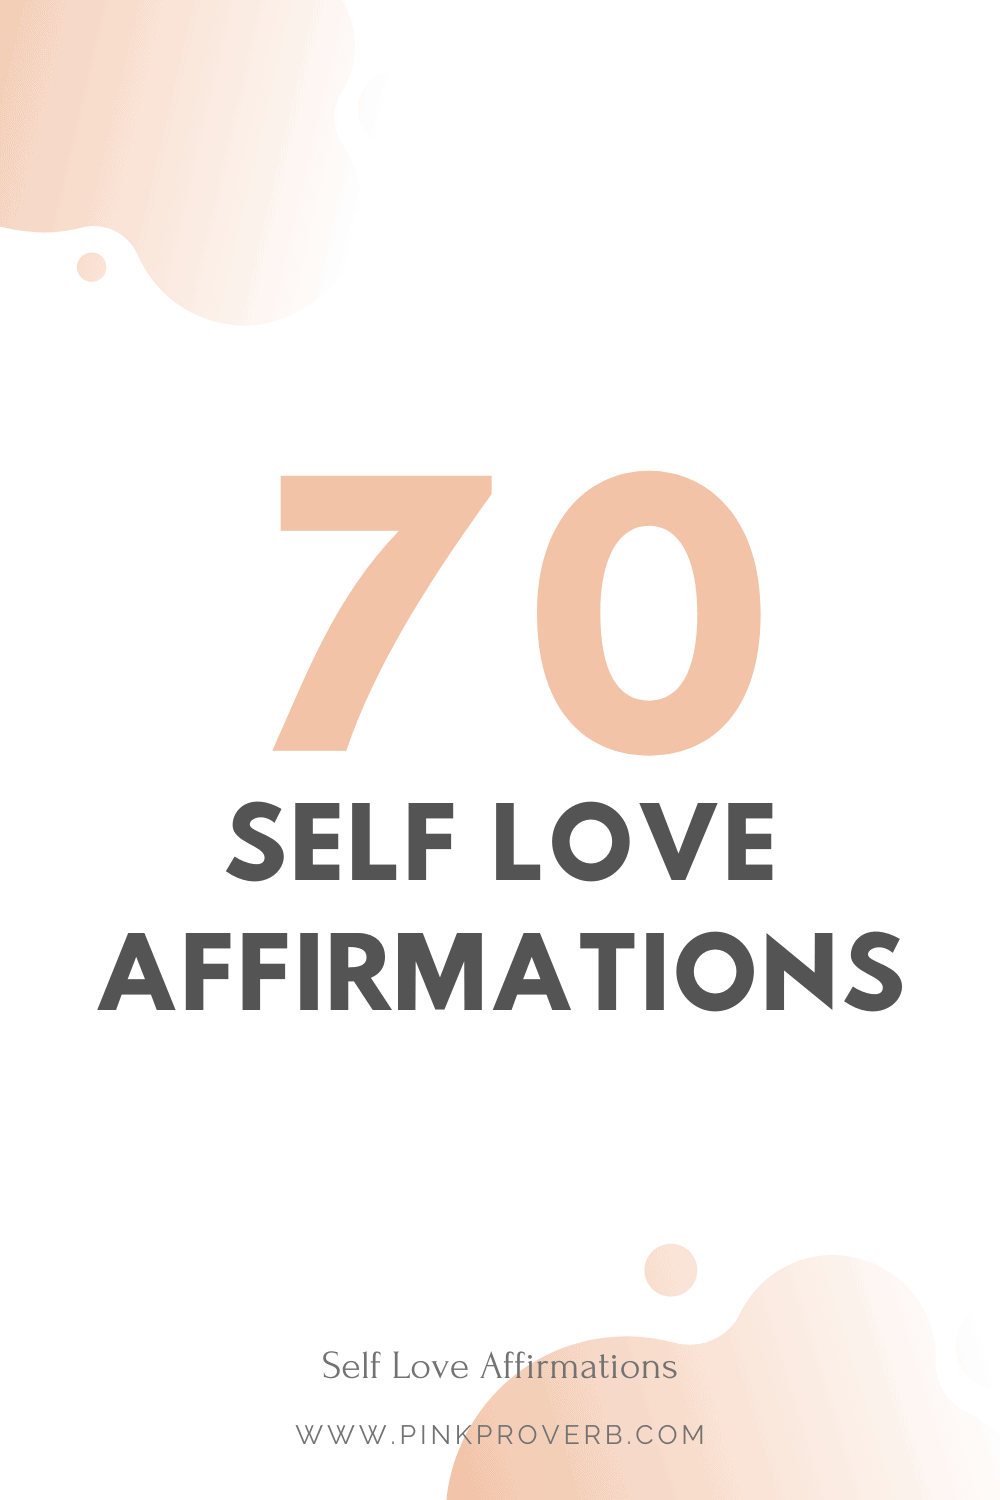 70 Self Love Affirmations to Change Your Life | Free Affirmation ...